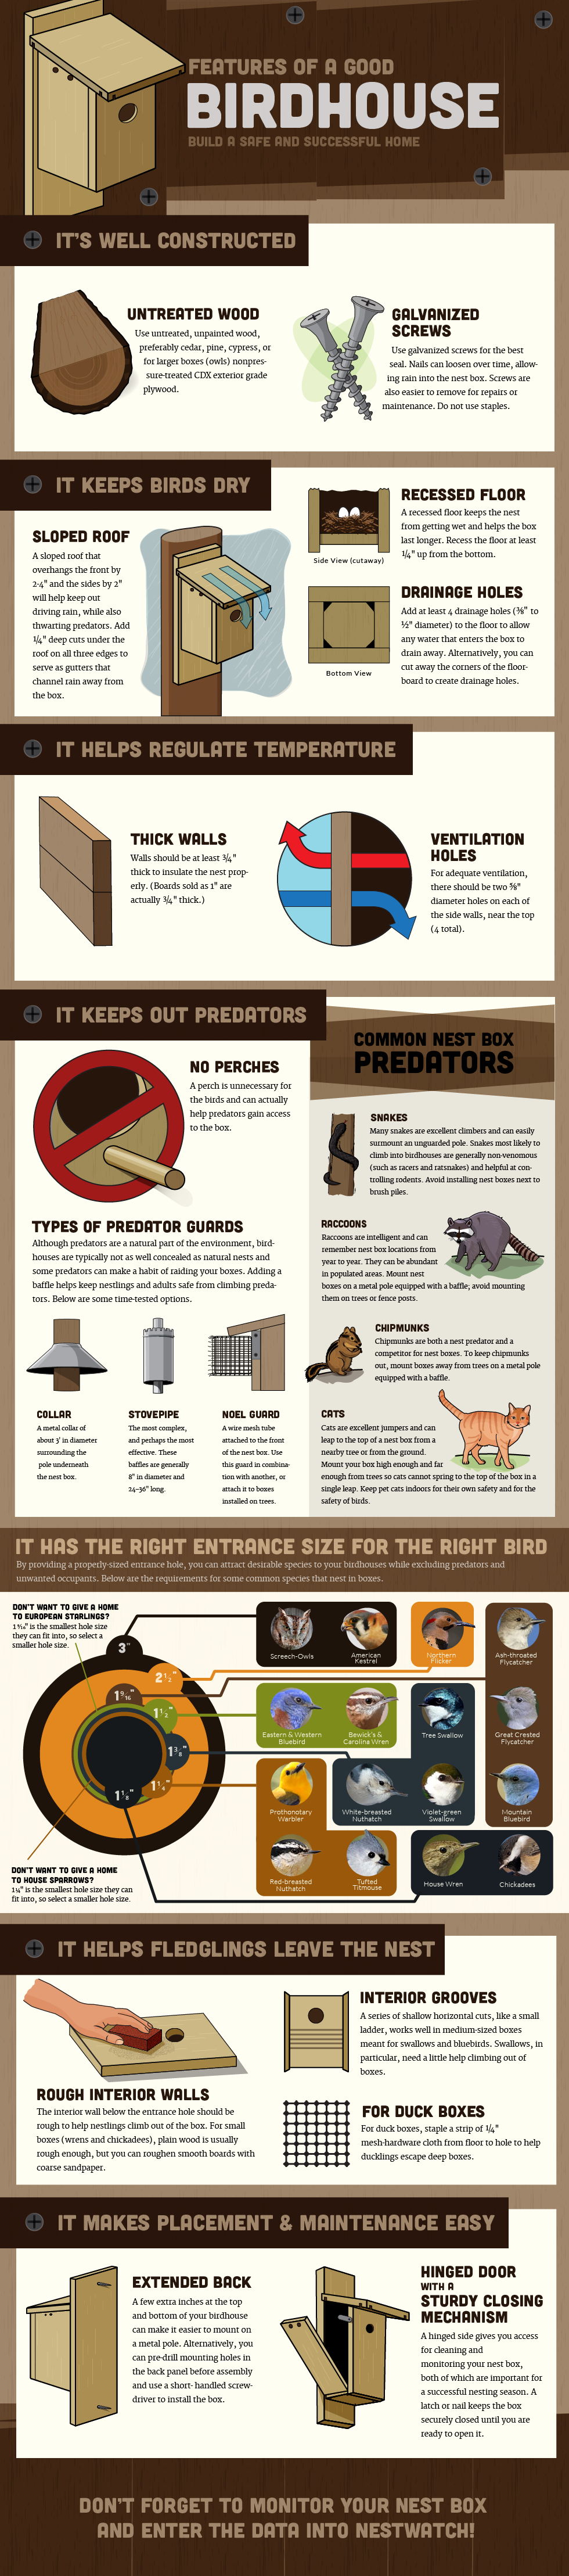 Features of a Good Nest Box